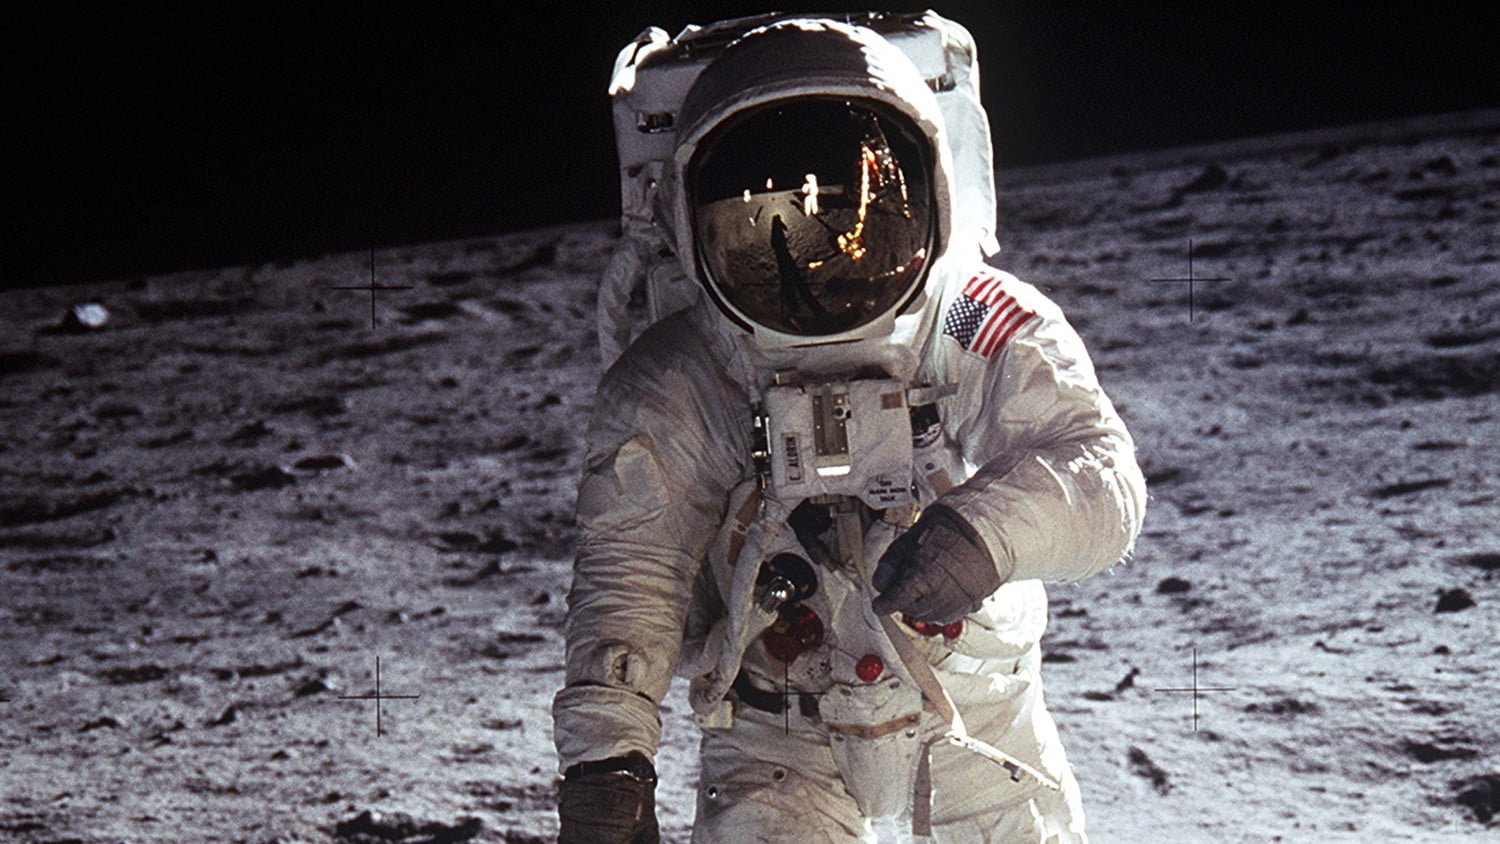 NASAs Apollo 11 mission could lead to the death of life on Earth